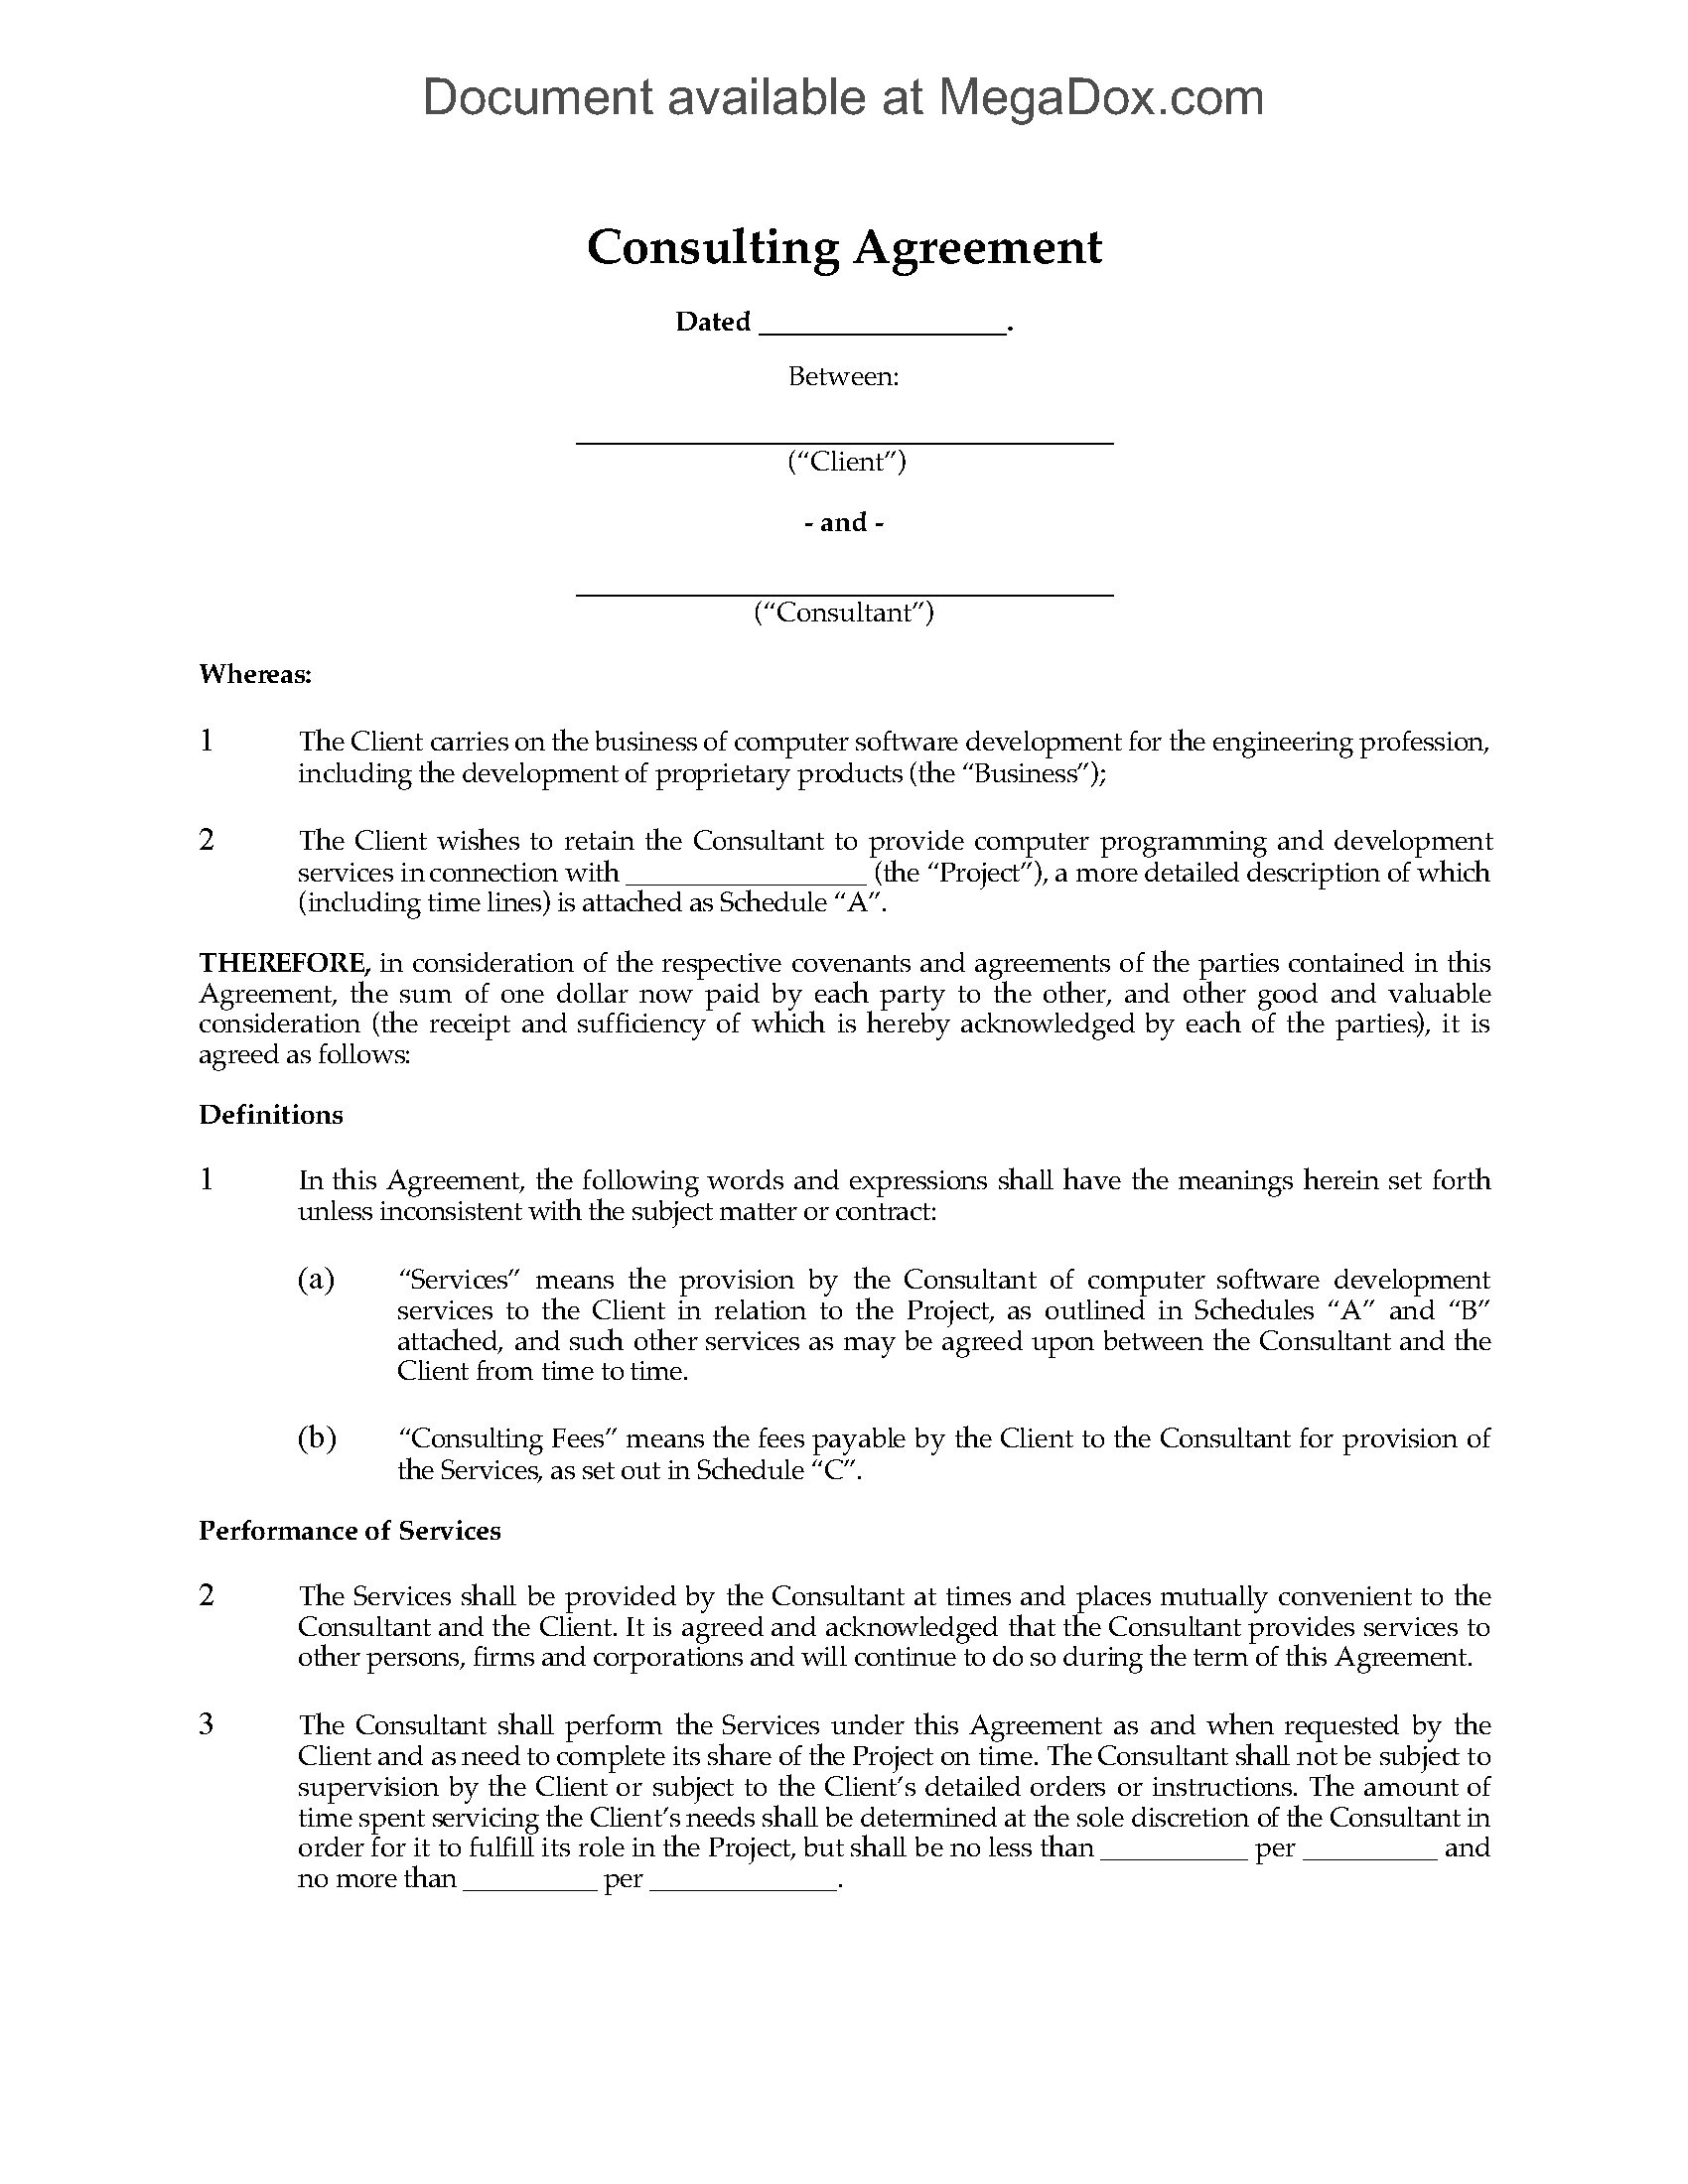 canada consulting agreement for software development